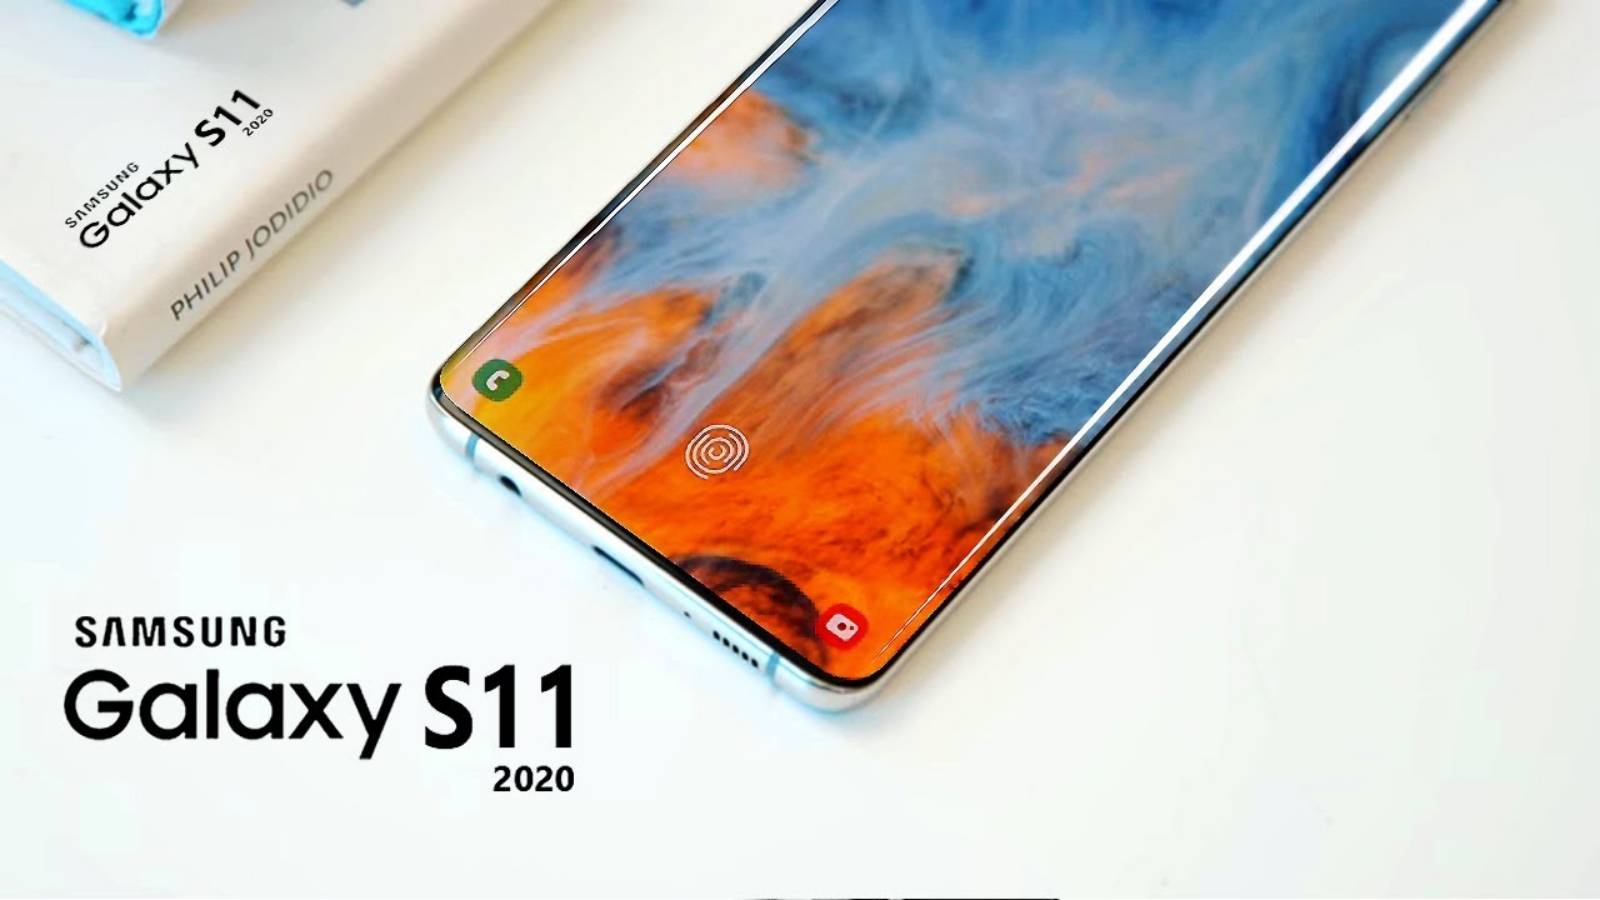 Samsung GALAXY S11 weapons